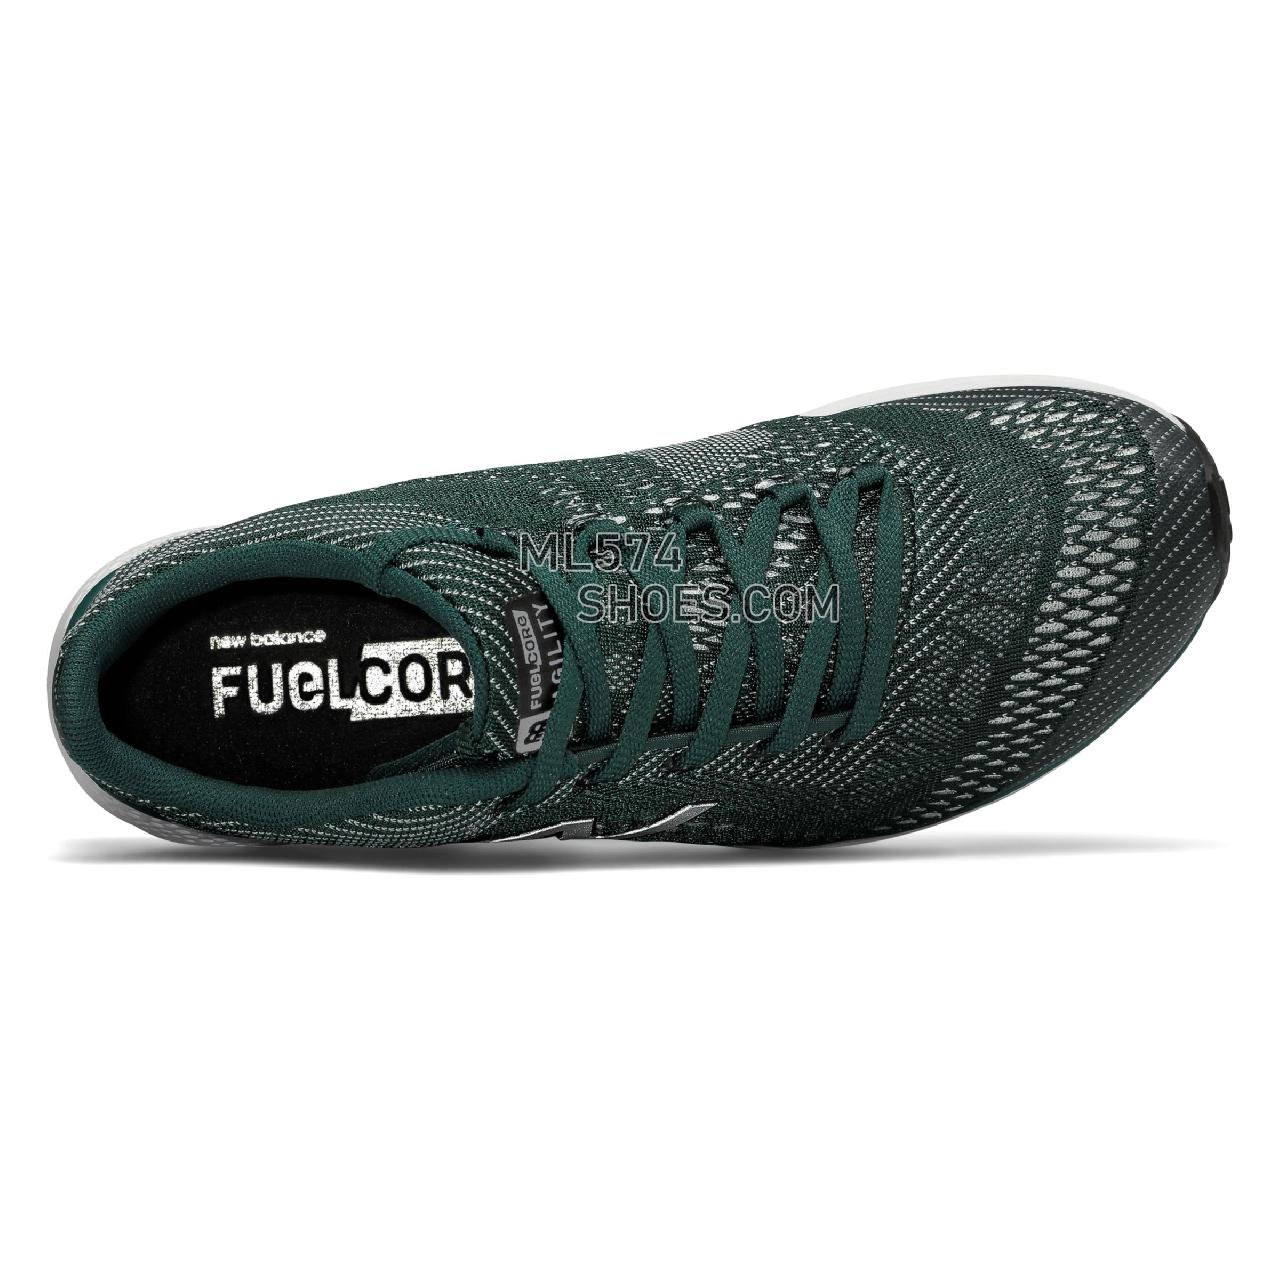 New Balance FuelCore Agility v2 Trainer - Women's 2 - X-training Deep Jade with Ocean Air - WXAGLGG2